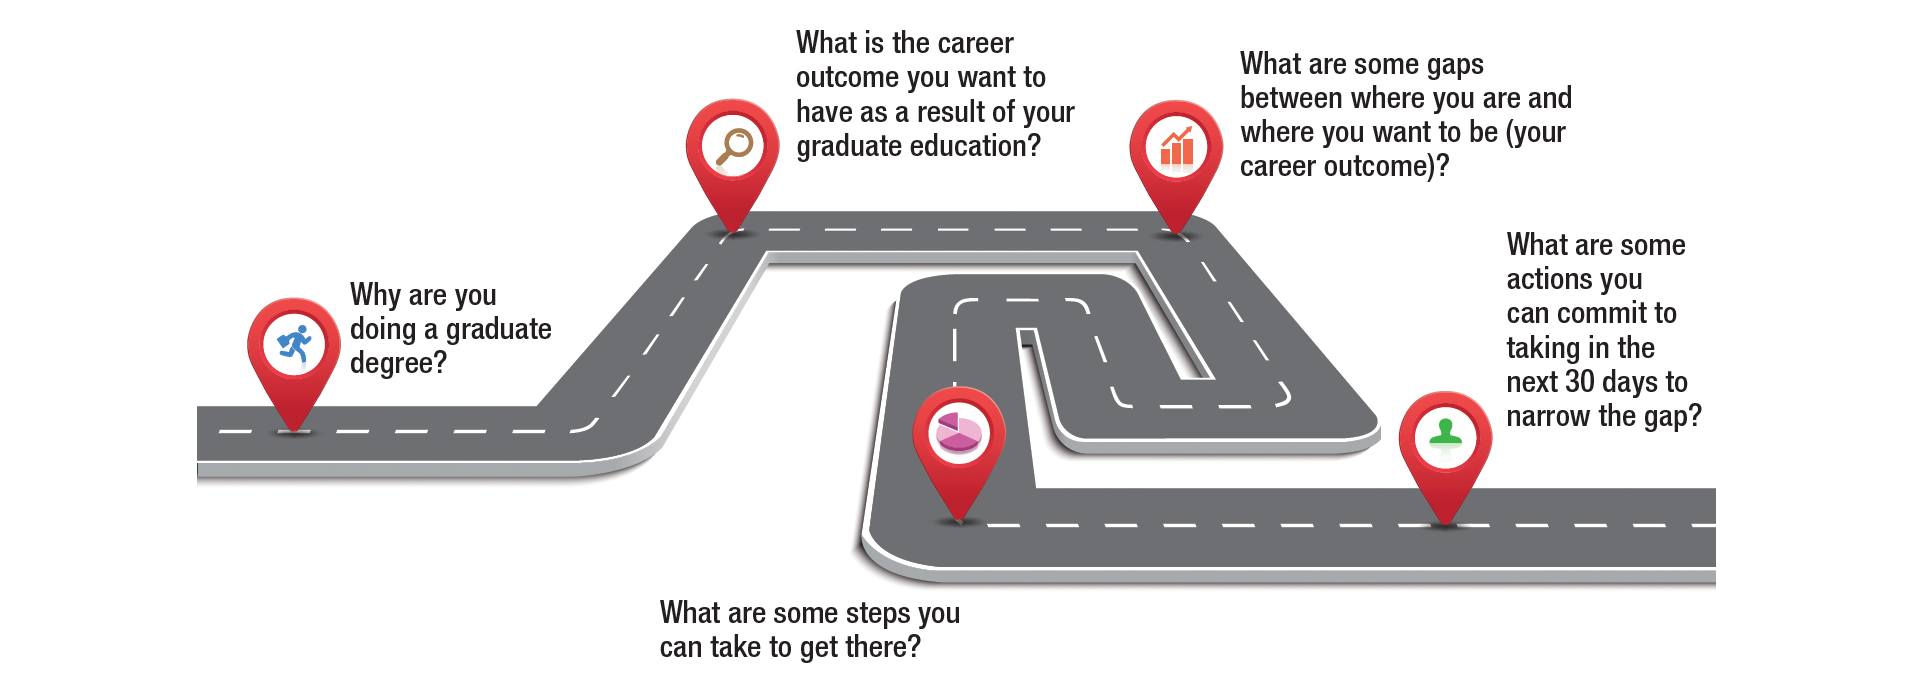 Career Coaching: A New Paradigm for Student-Centered Career Services